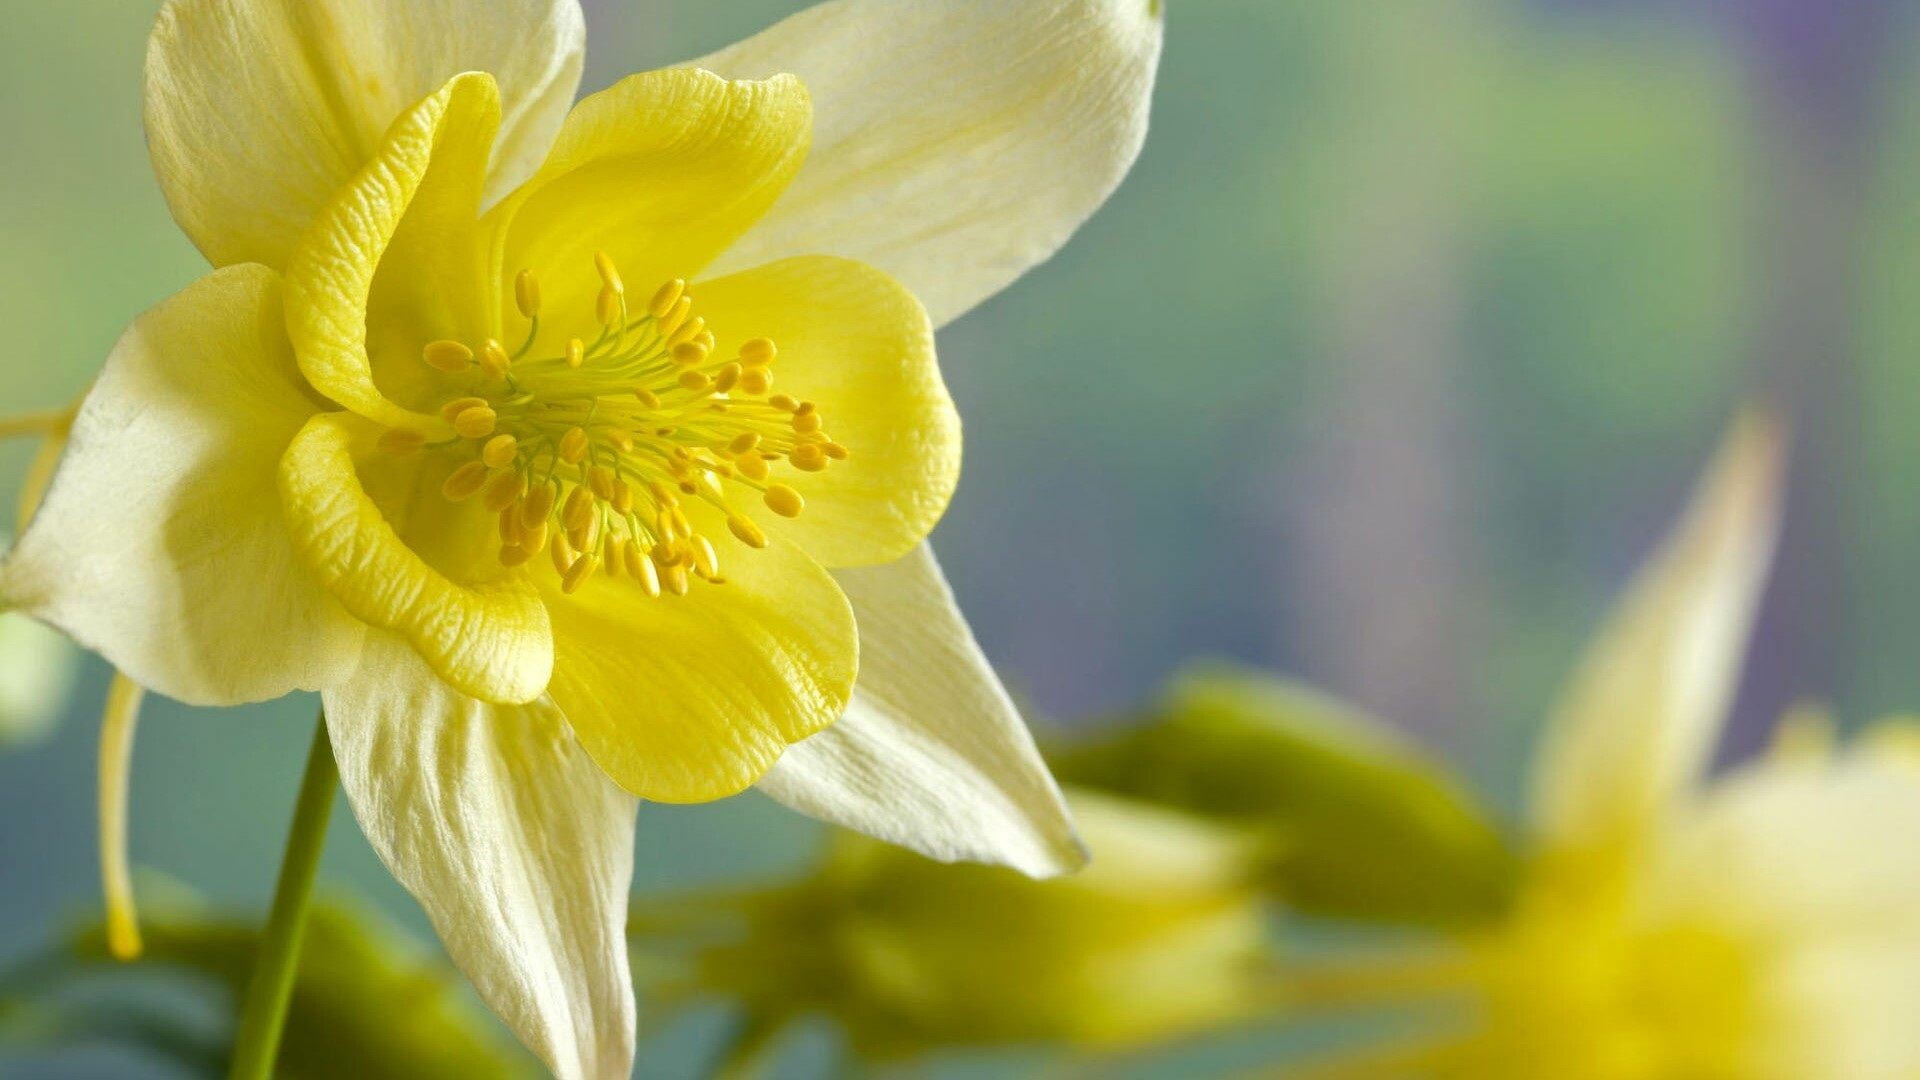 Daffodil: One of the most popular spring bulbs, typically with yellow or white flowers rising above long slender leaves. 1920x1080 Full HD Background.